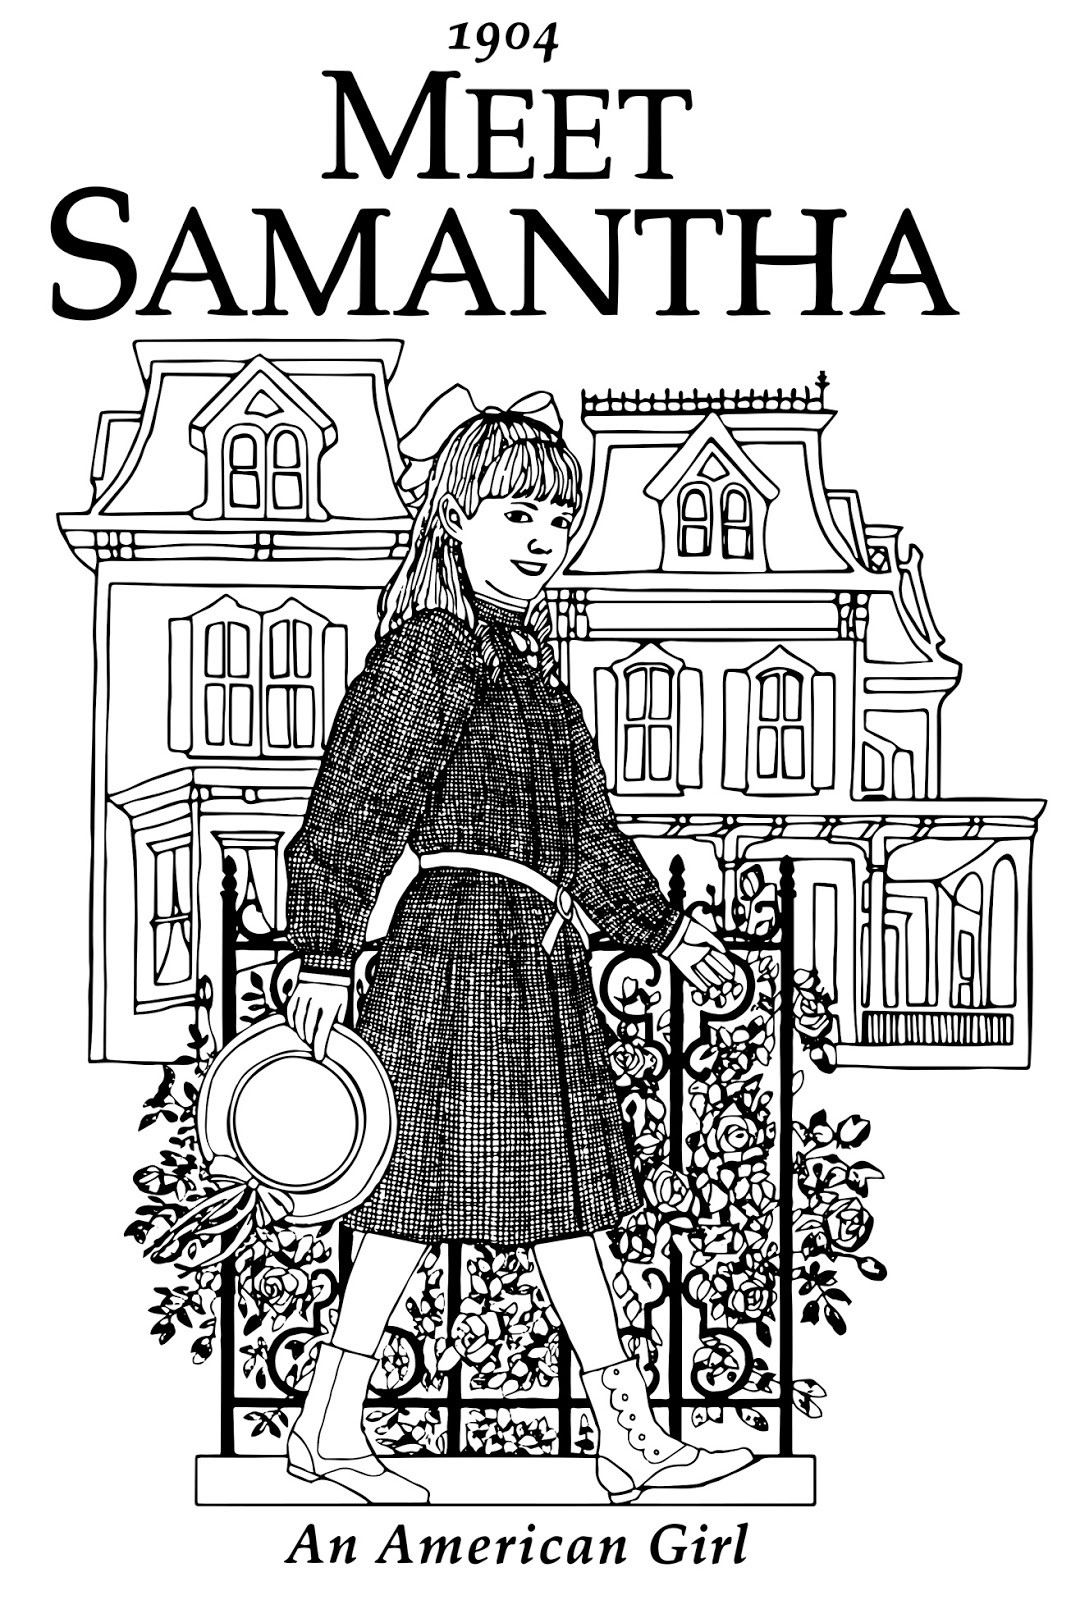 American Girl Coloring Pages Samantha
 My Cup Overflows Meet Samantha An American Girl